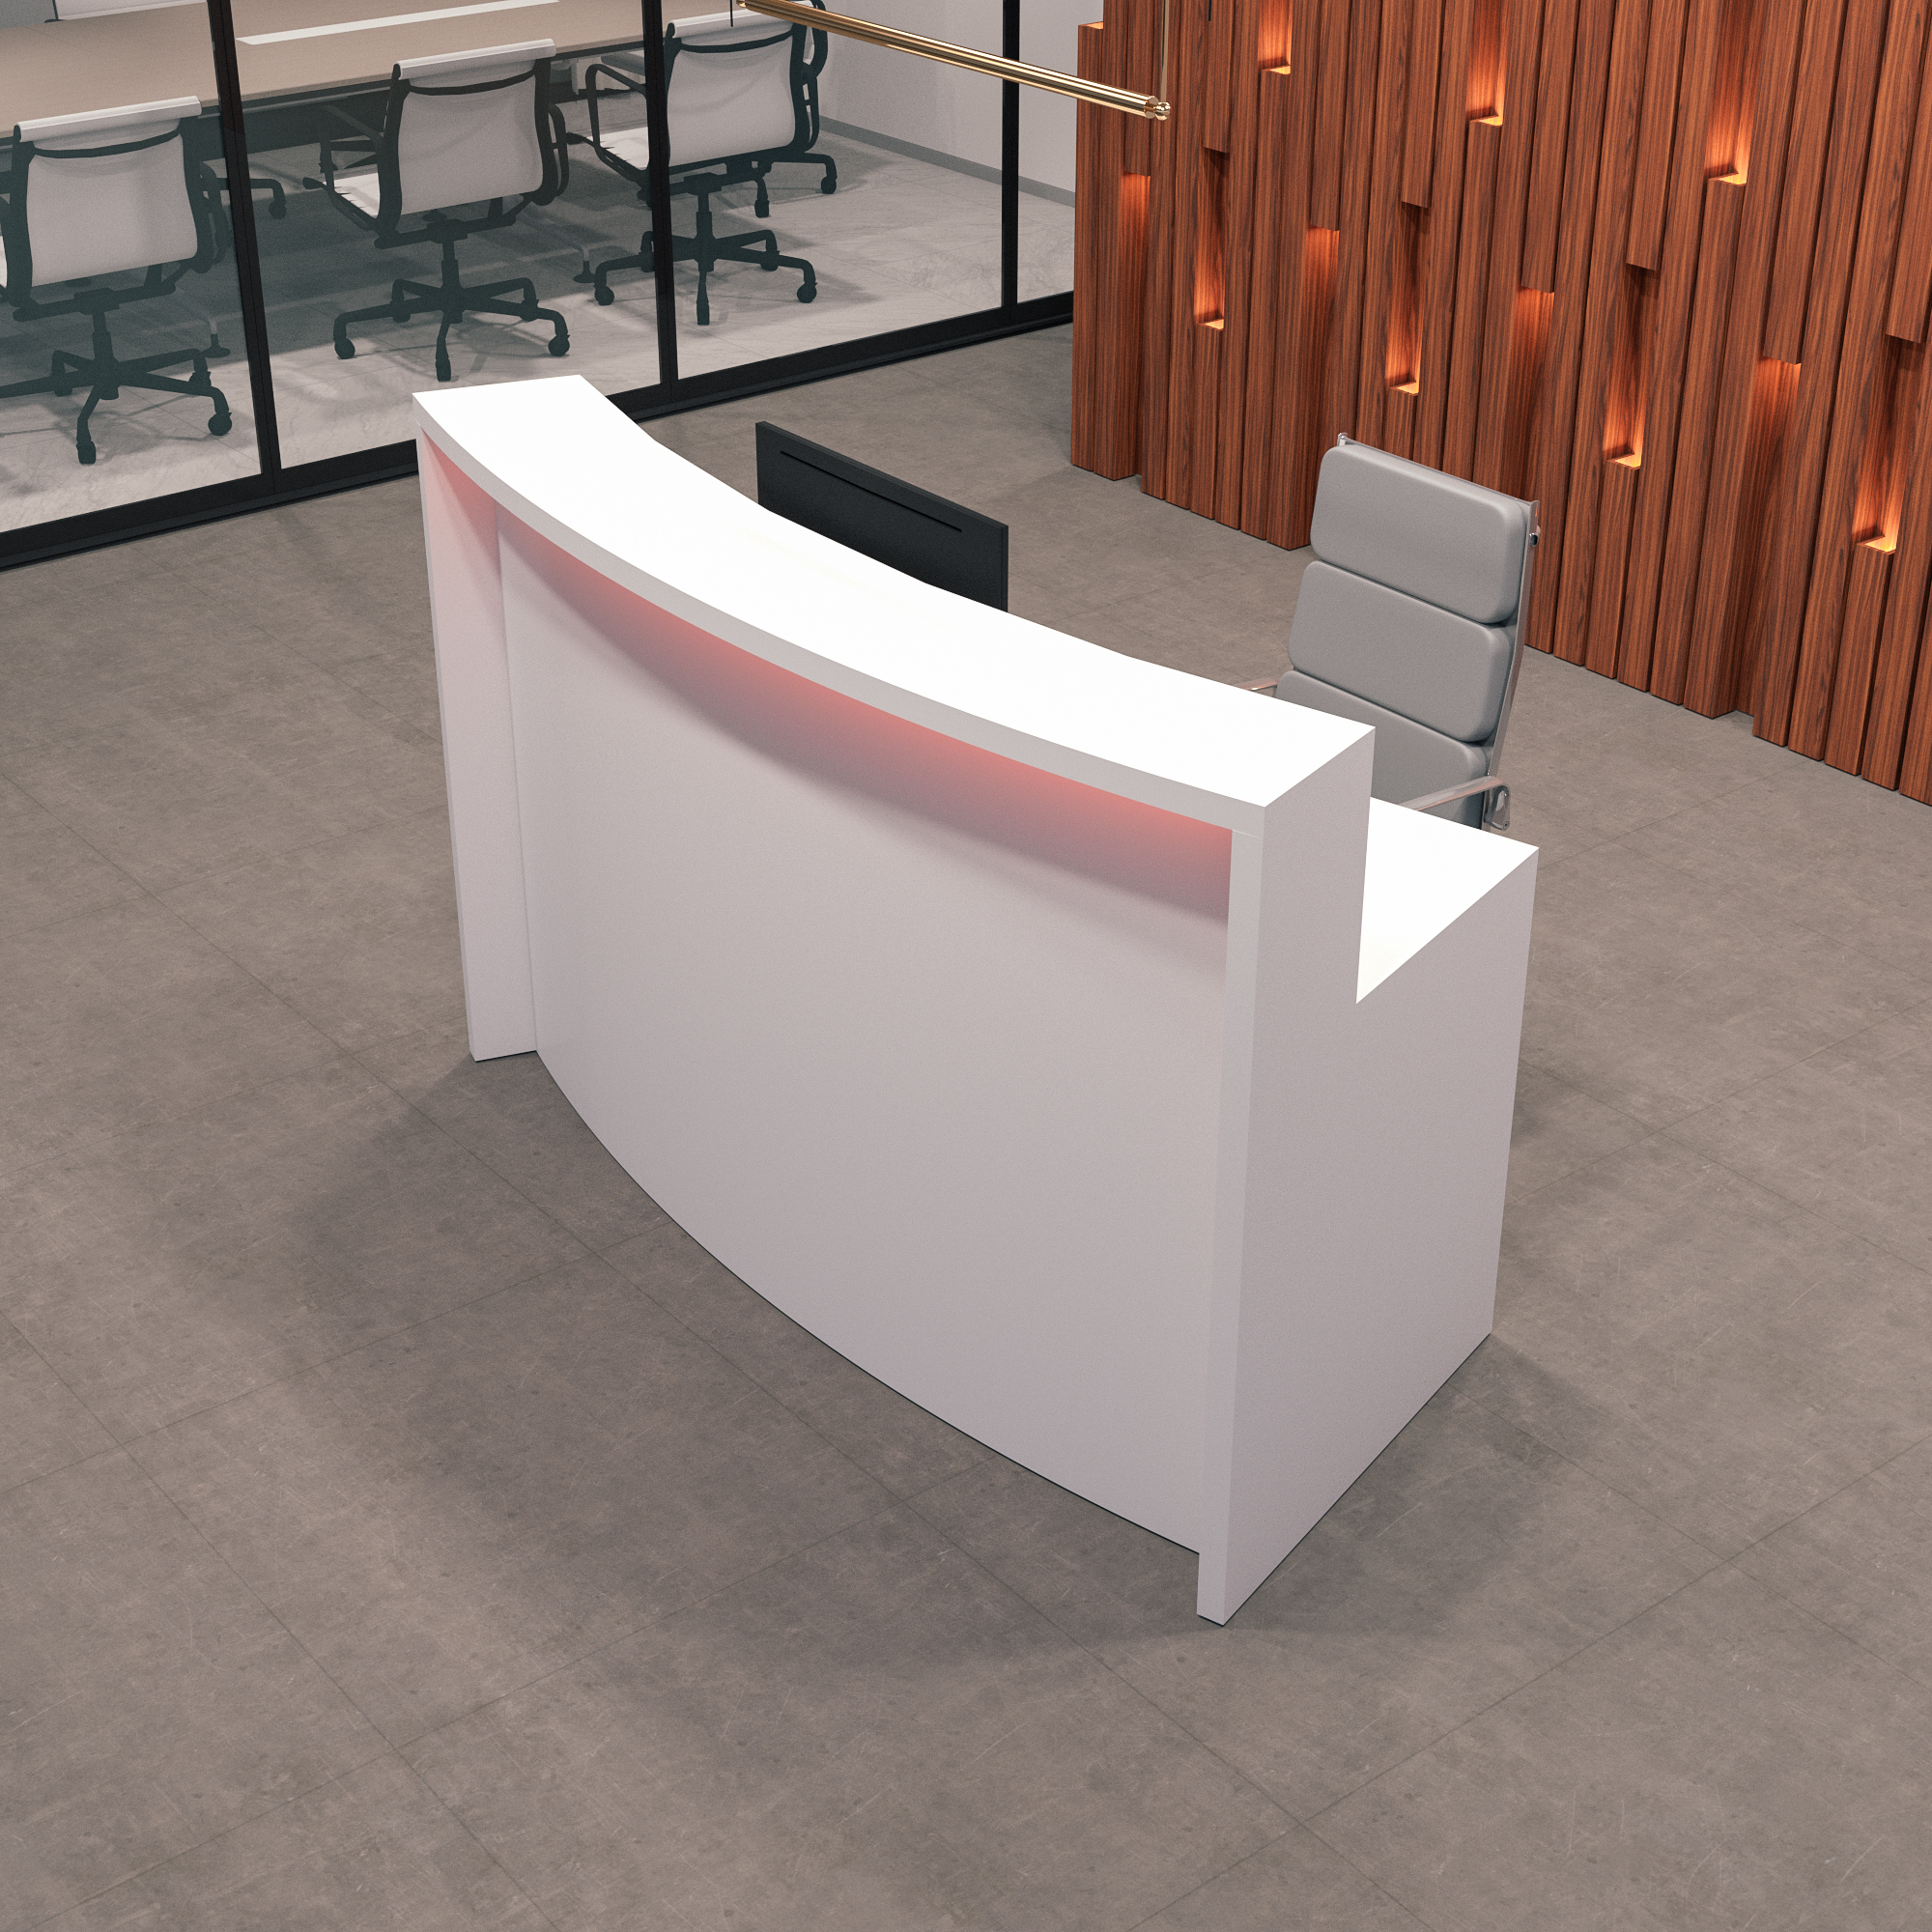 72-inch Seattle X1 Custom Reception Desk in white gloss laminate desk and curved front panel, with multi-colored LED, shown here.